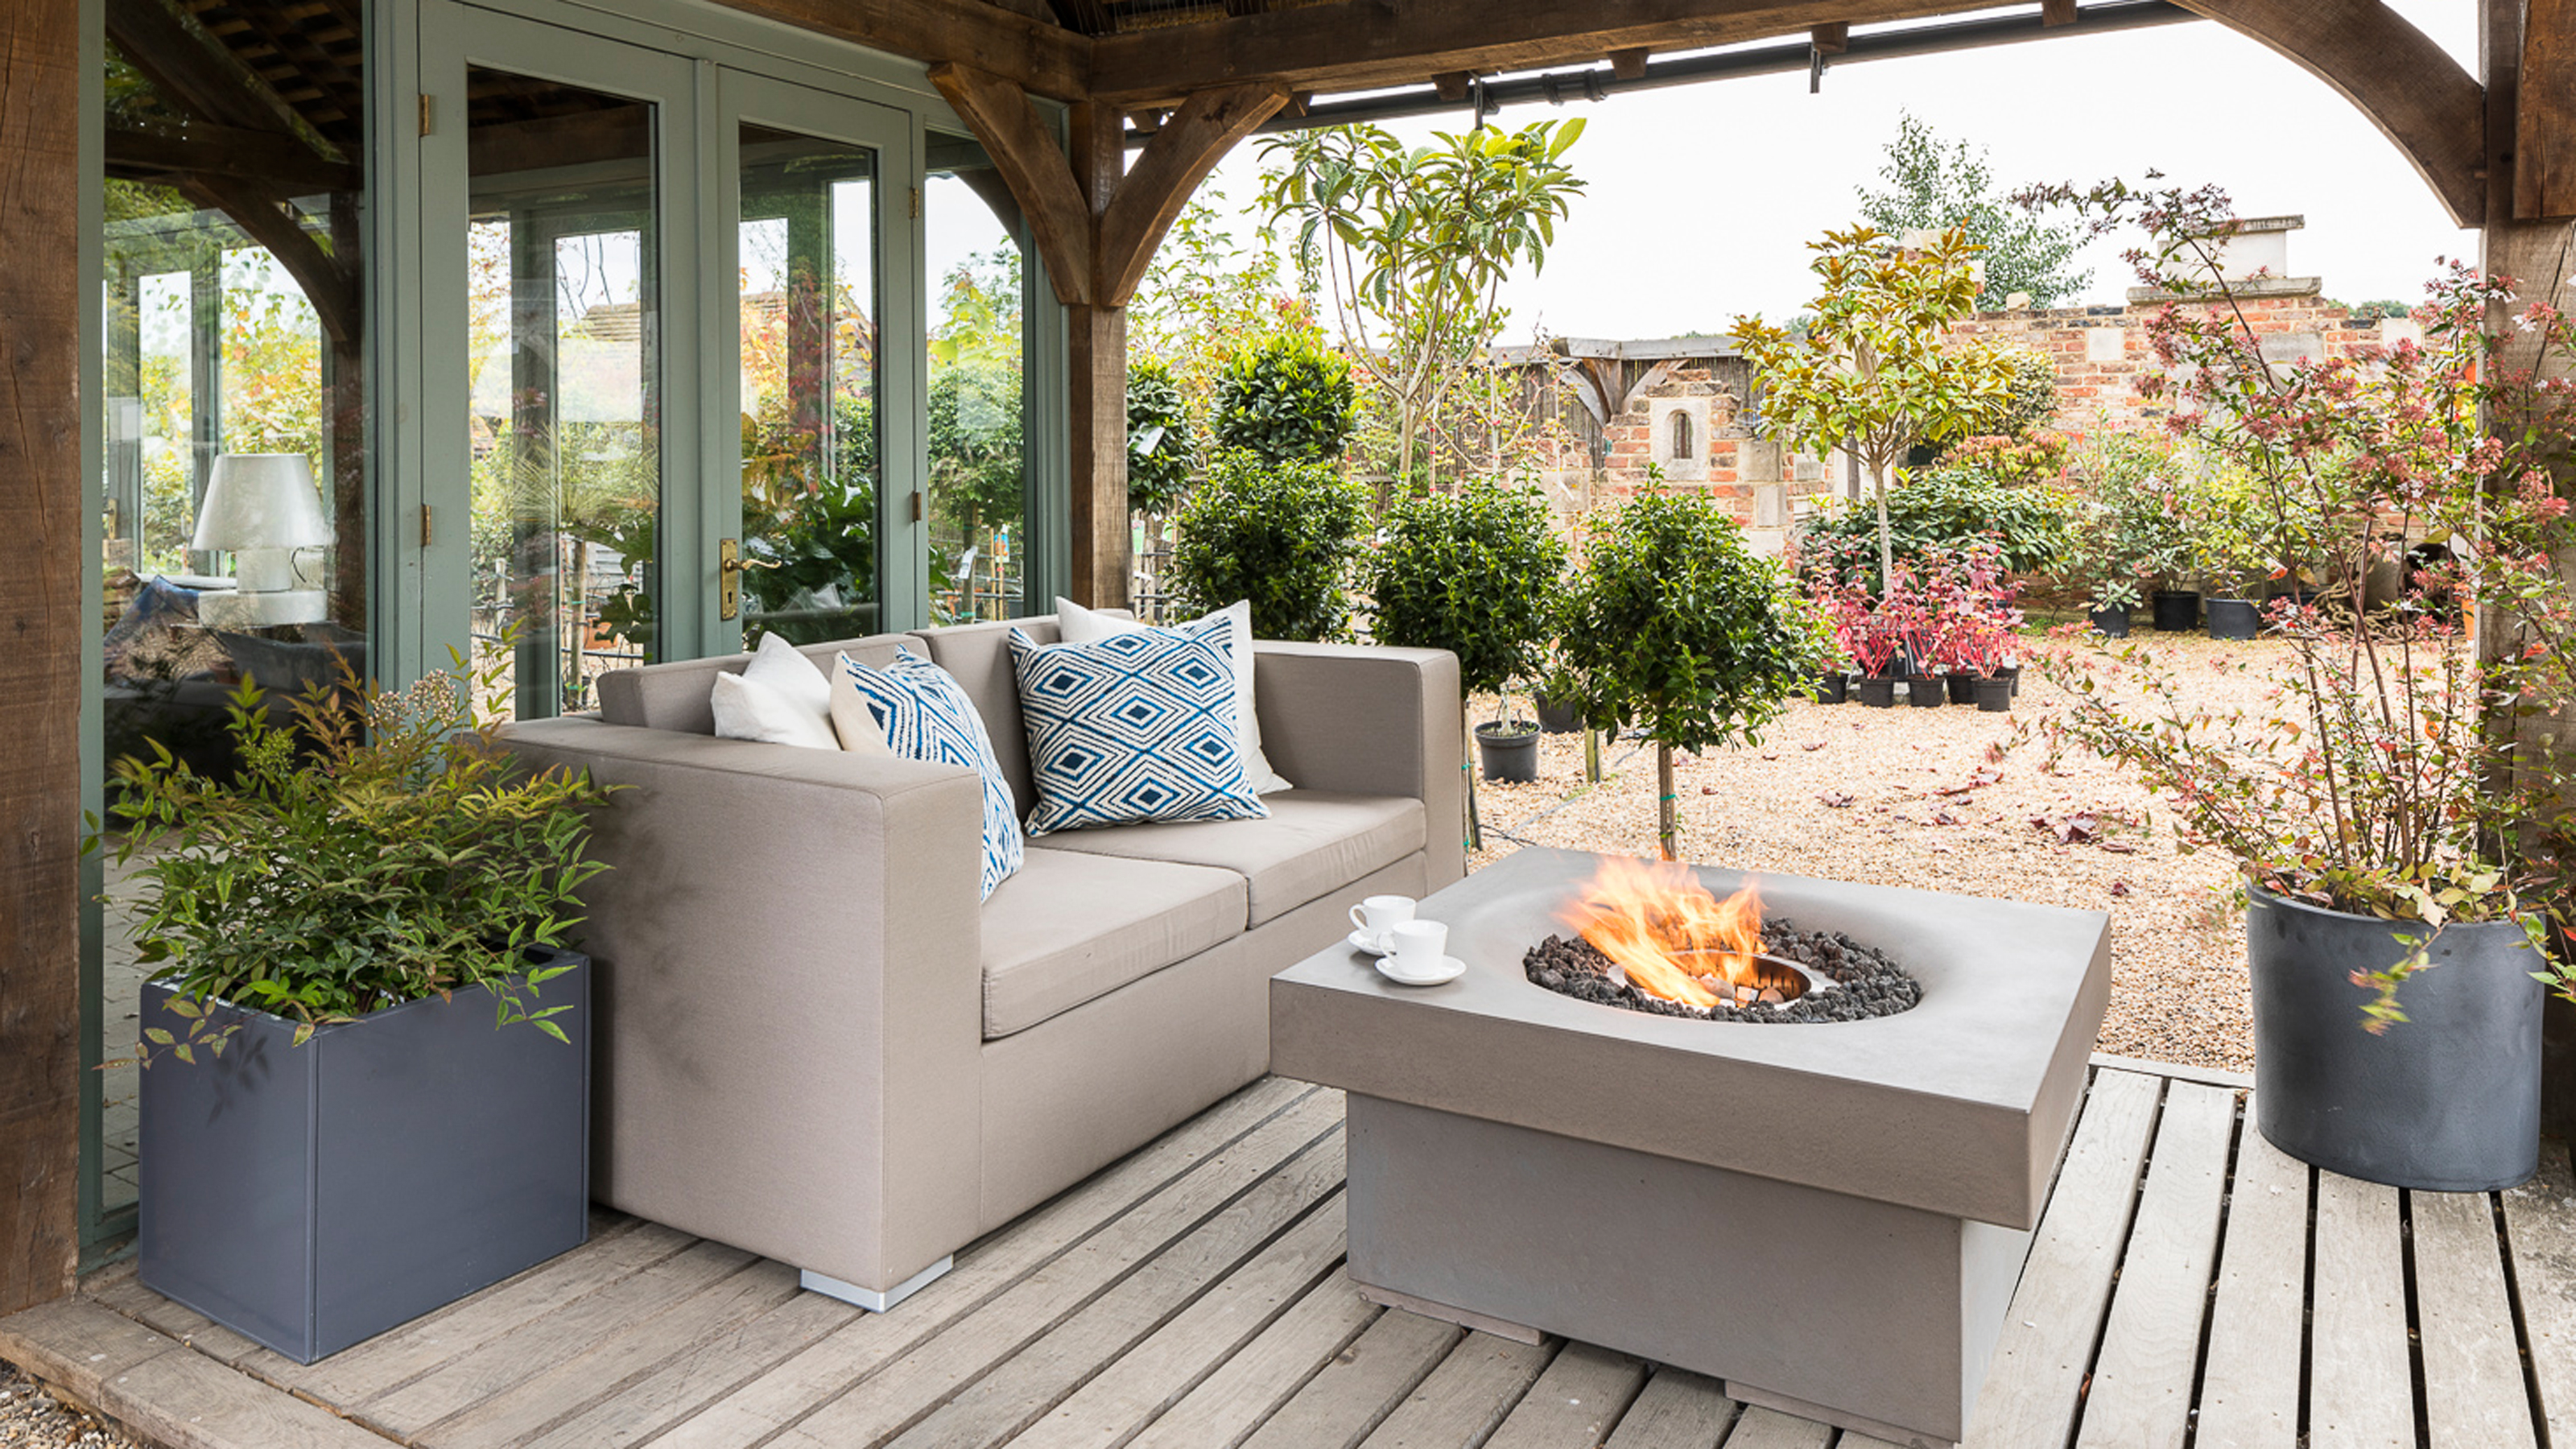 18 deck ideas for a stylish backyard or garden   Real Homes